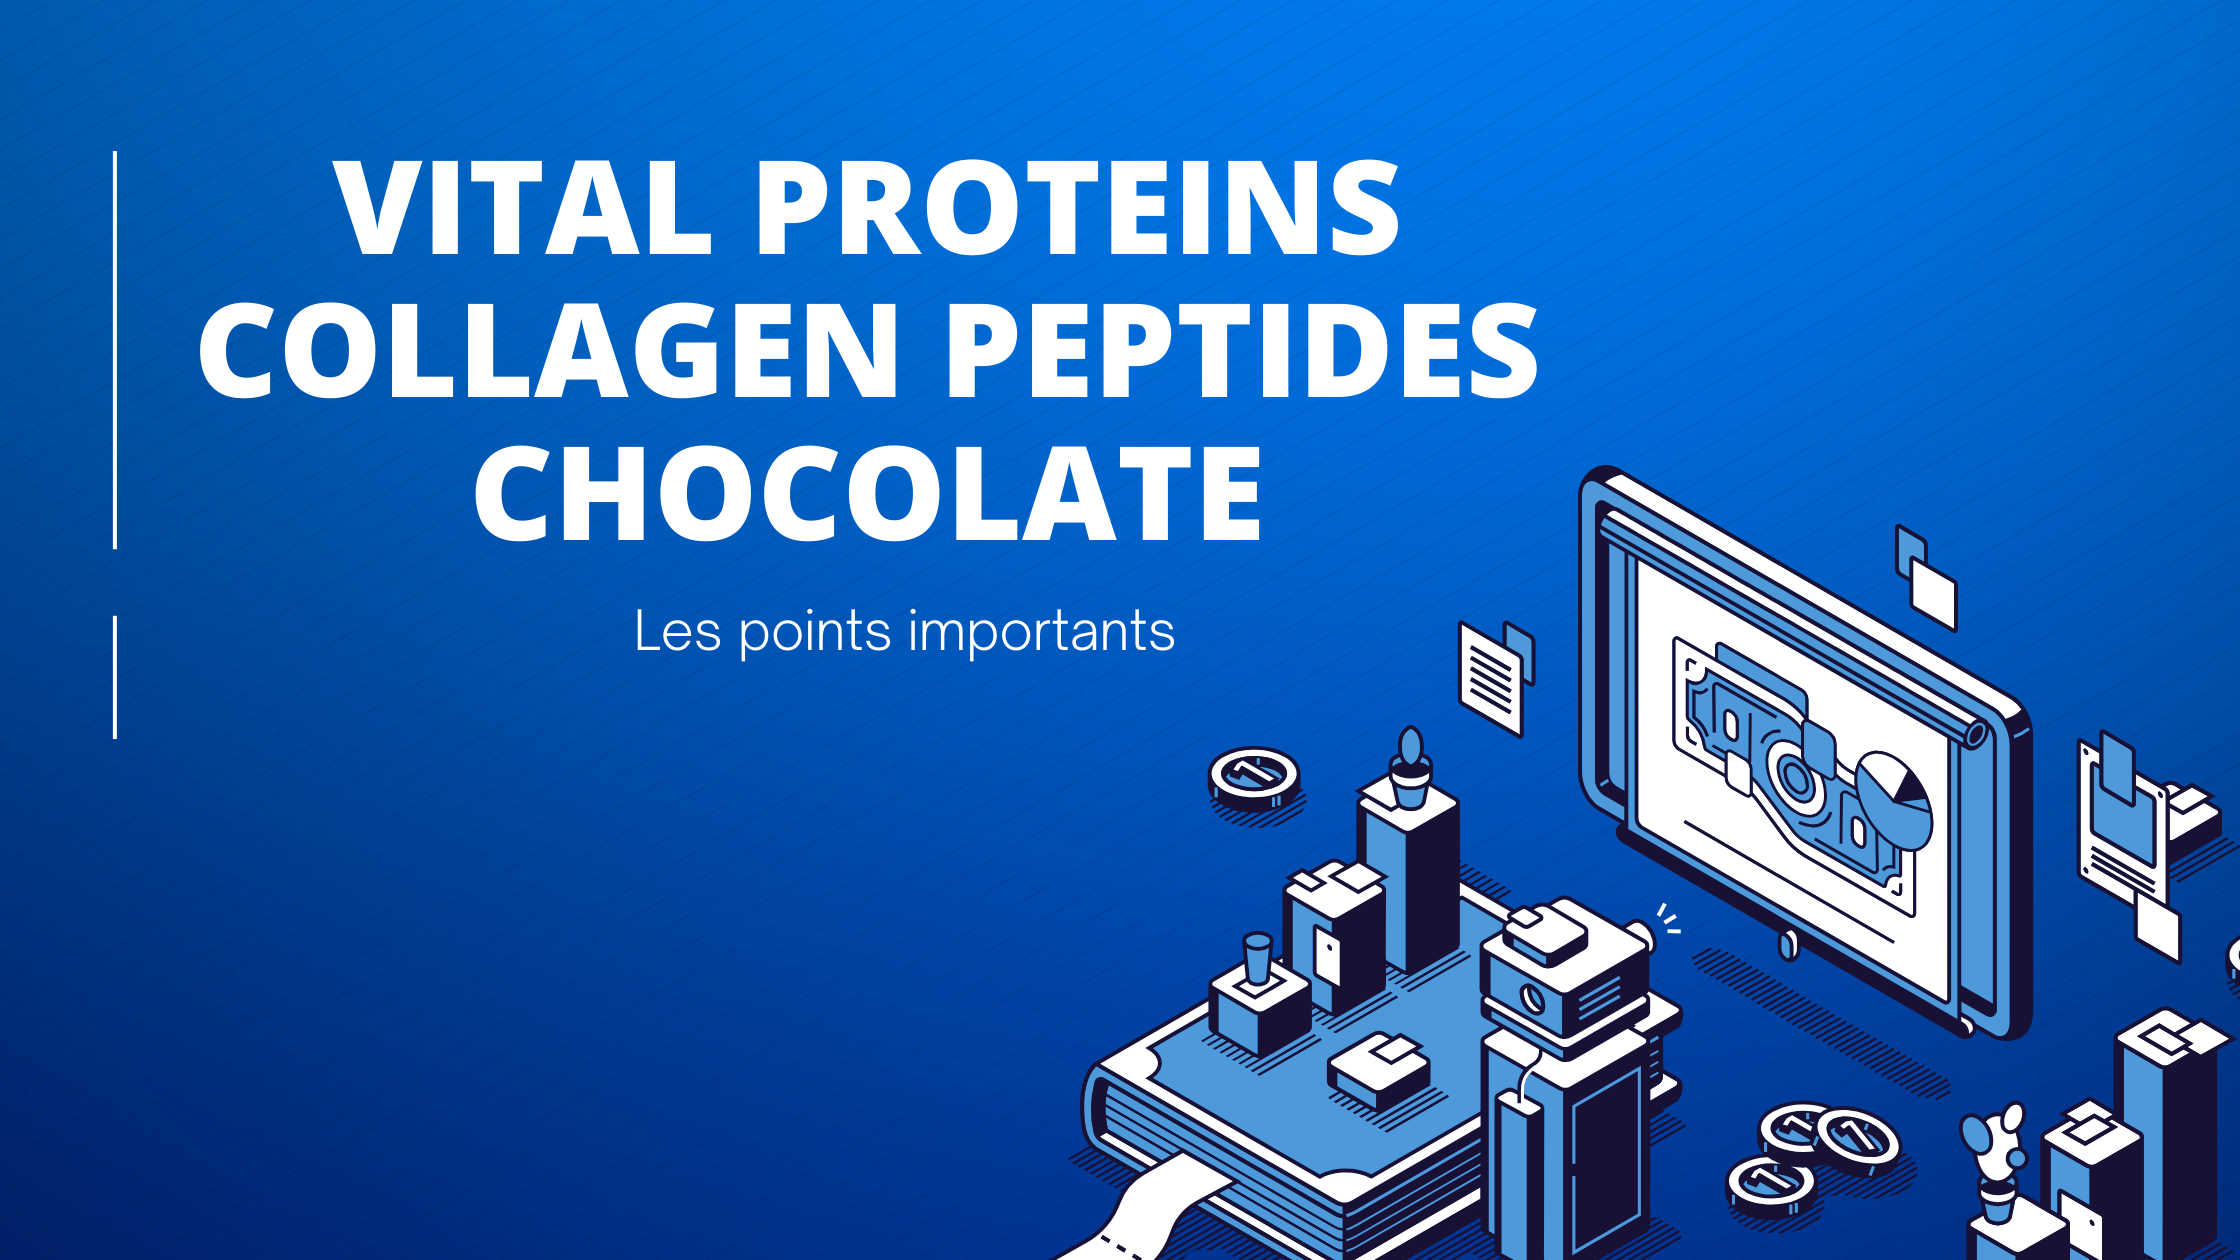 Vital proteins collagen peptides chocolate | Les points importants